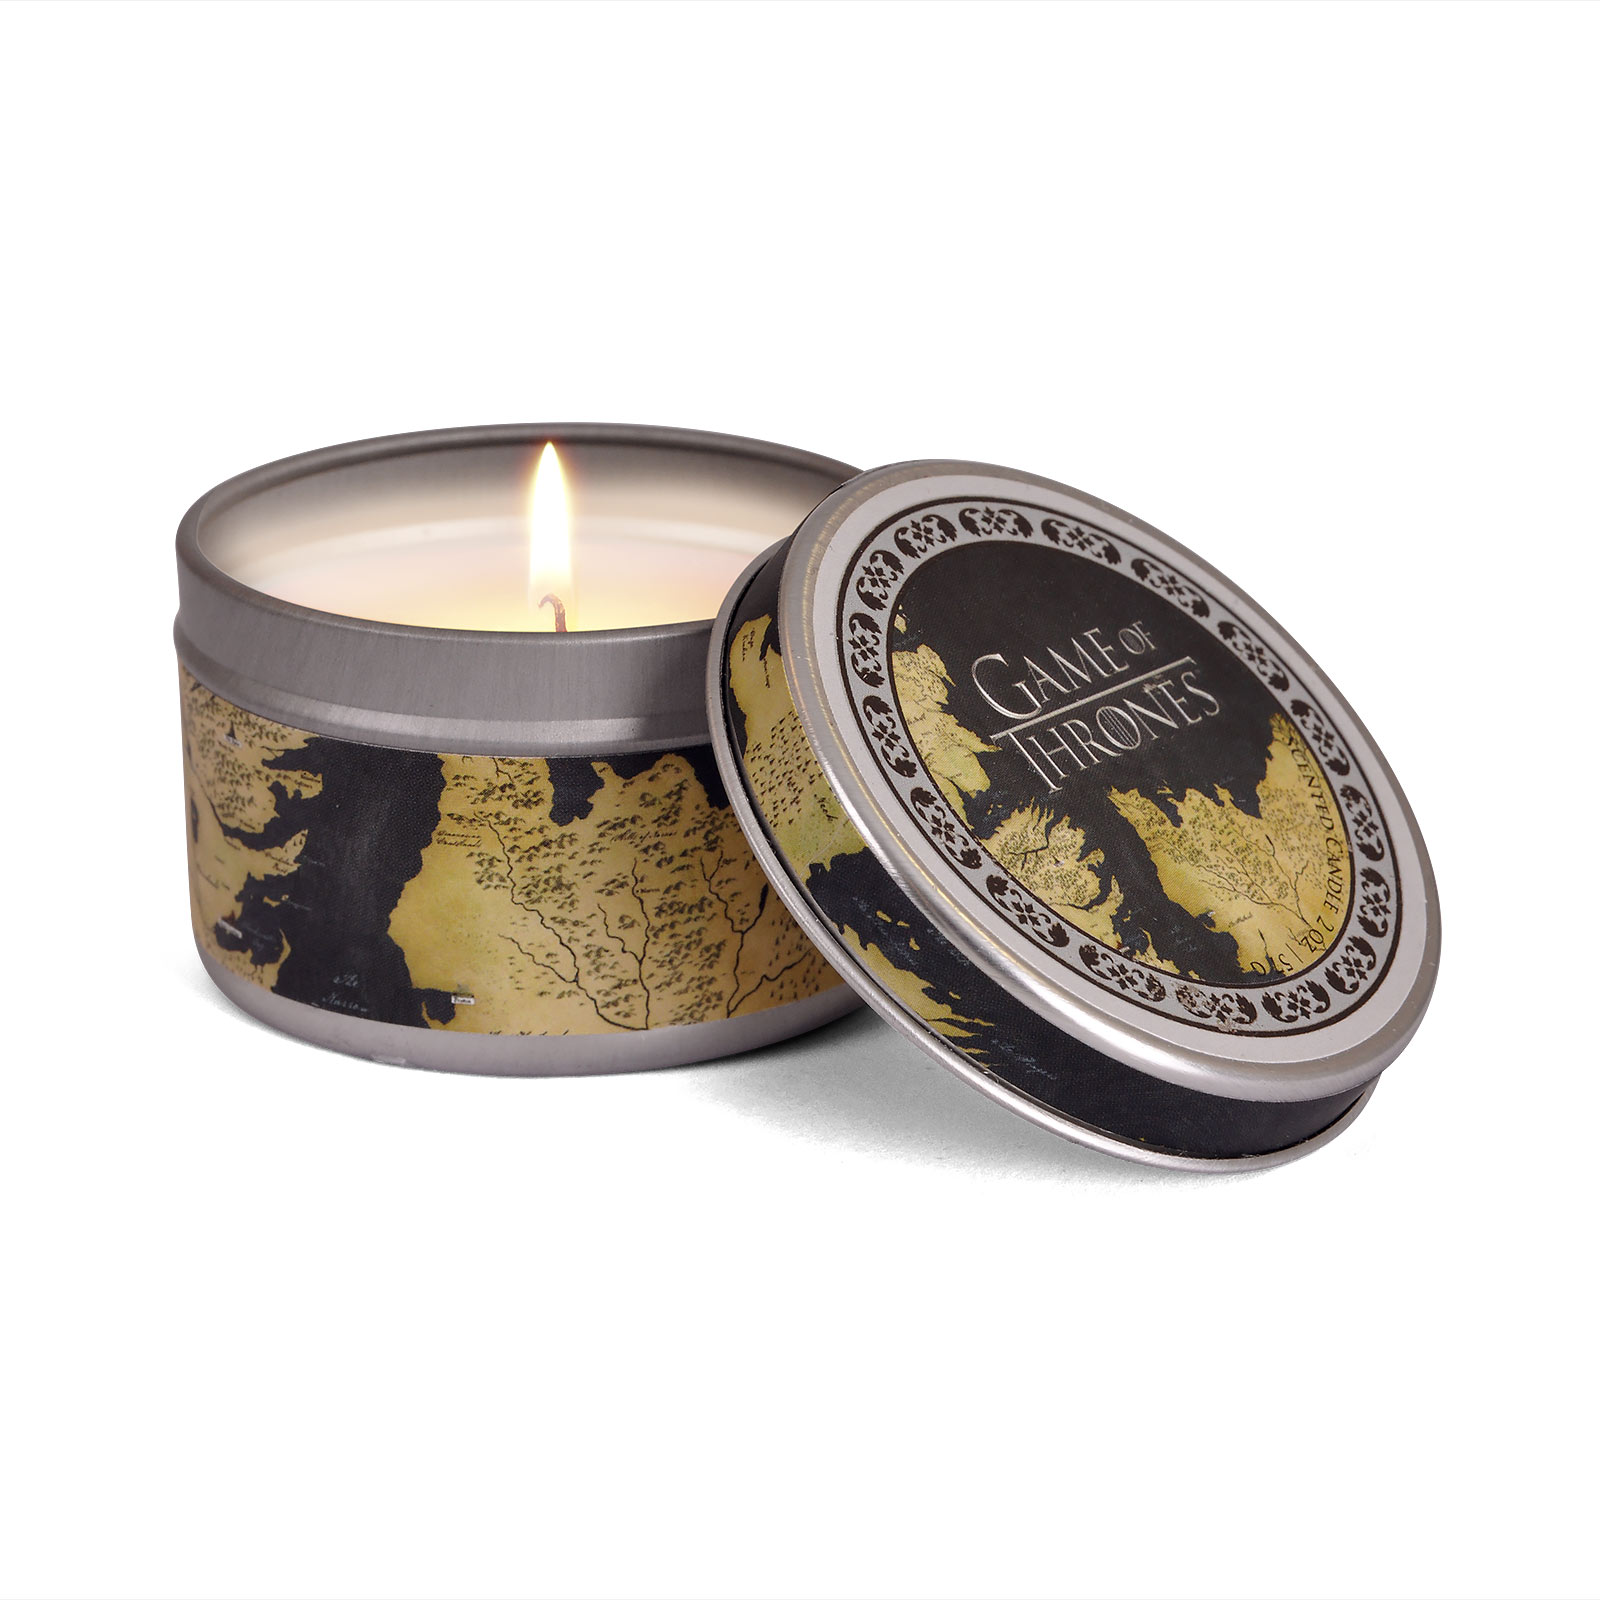 Game of Thrones - Westeros and Essos Scented Candle